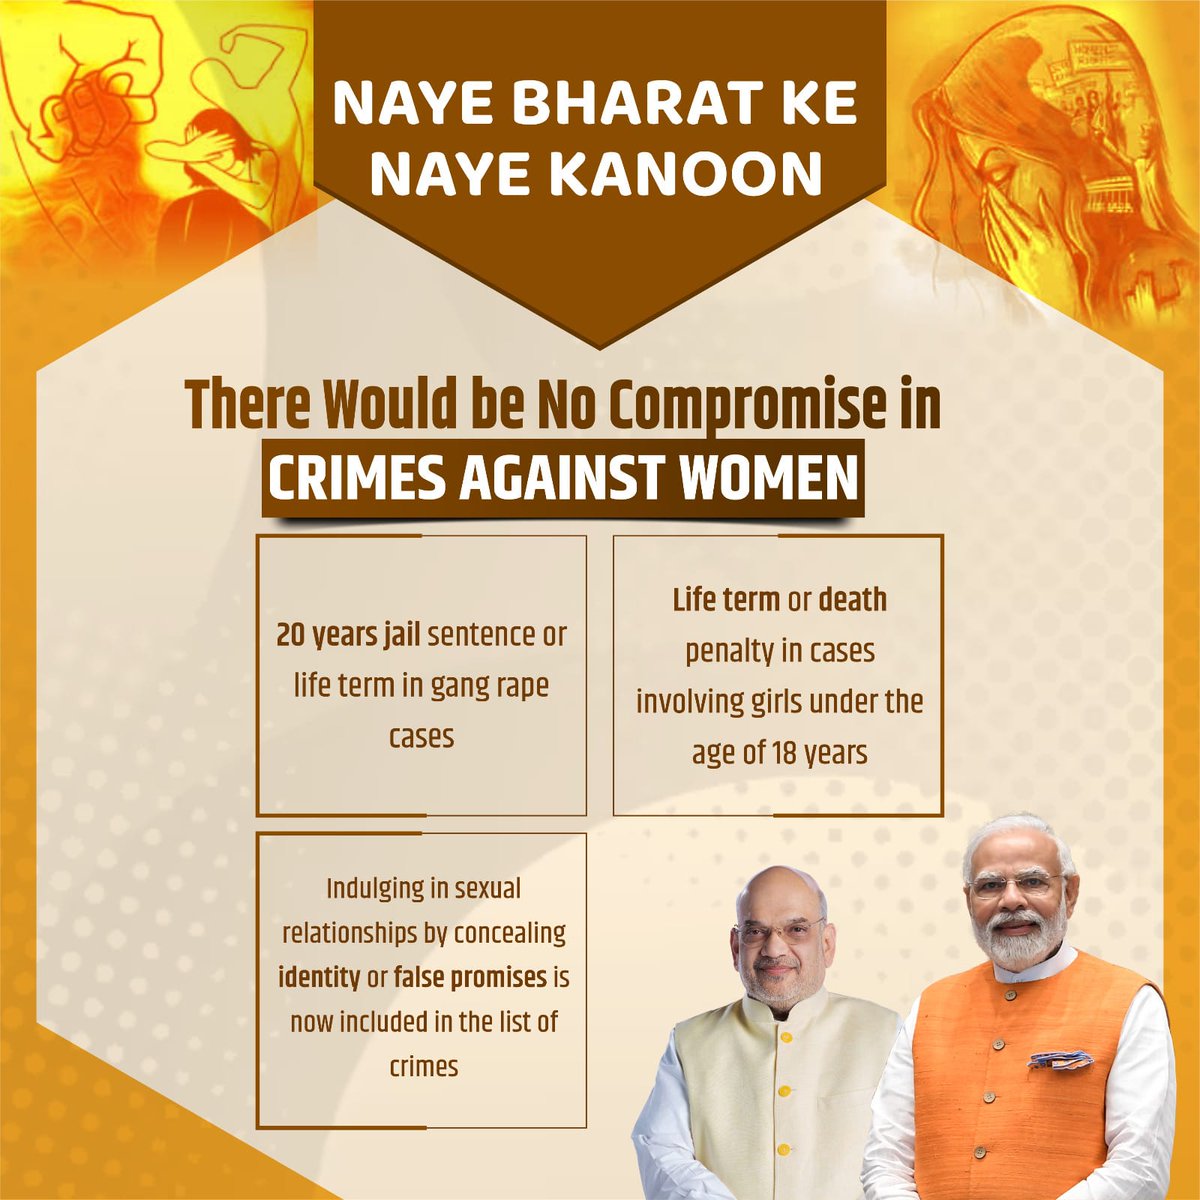 Hon'ble PM Shri @narendramodi led Union Govt is committed on making the nation safe for girls & women. The recent decisions toward women's safety are the reflection of the same. @HMOIndia #NayeBharatKeNayeKanoon